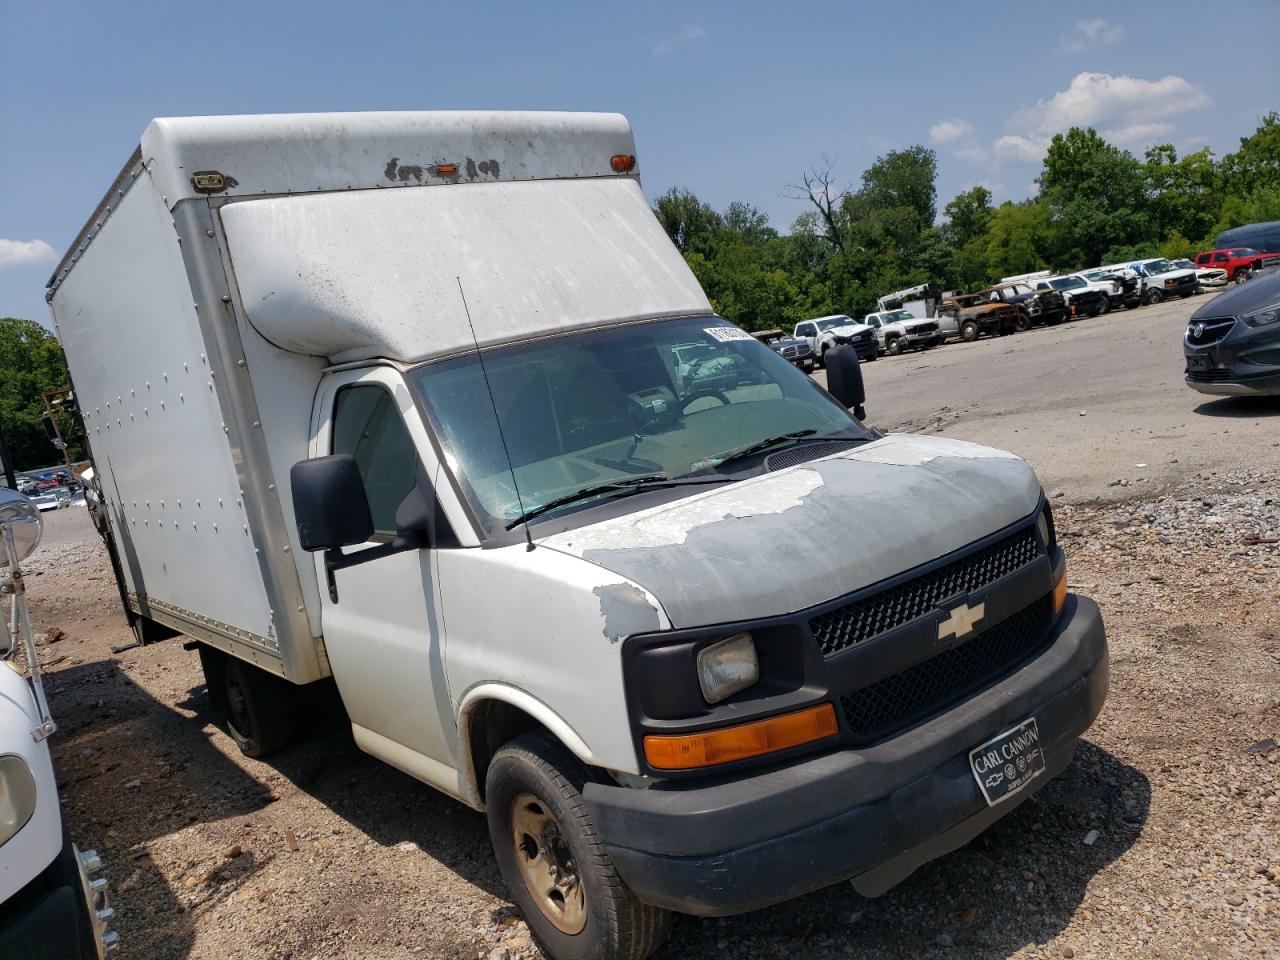 1GB3G2AG5A1****** Salvage and Wrecked 2010 Chevrolet Express in AL - Hueytown